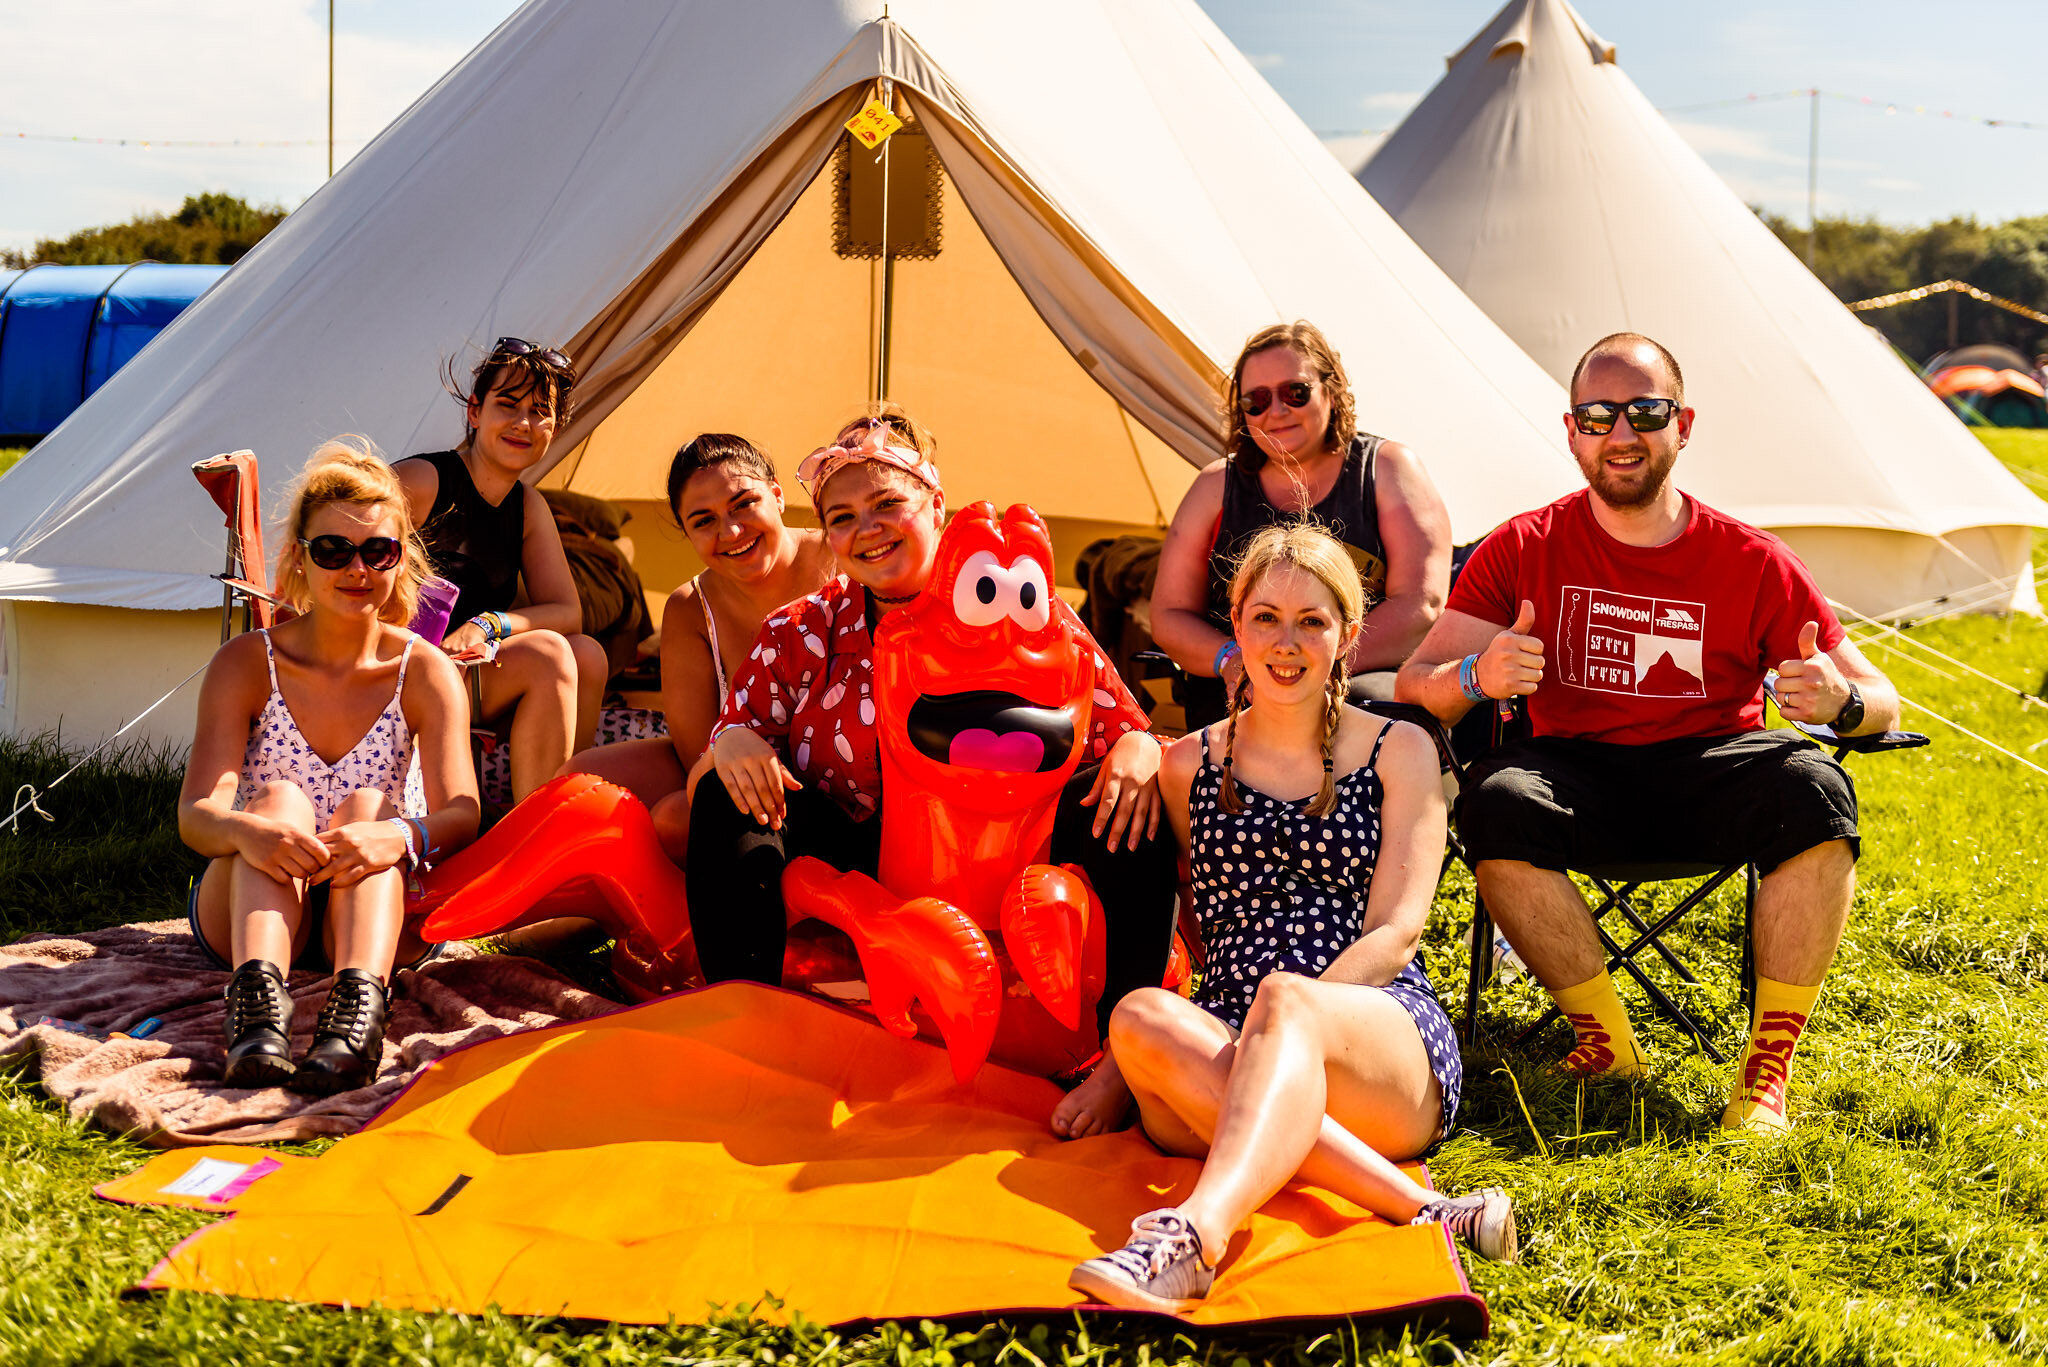 Leeds Festival Crank Up Your Comfort With Luxury Camping At Leeds Festival 2020